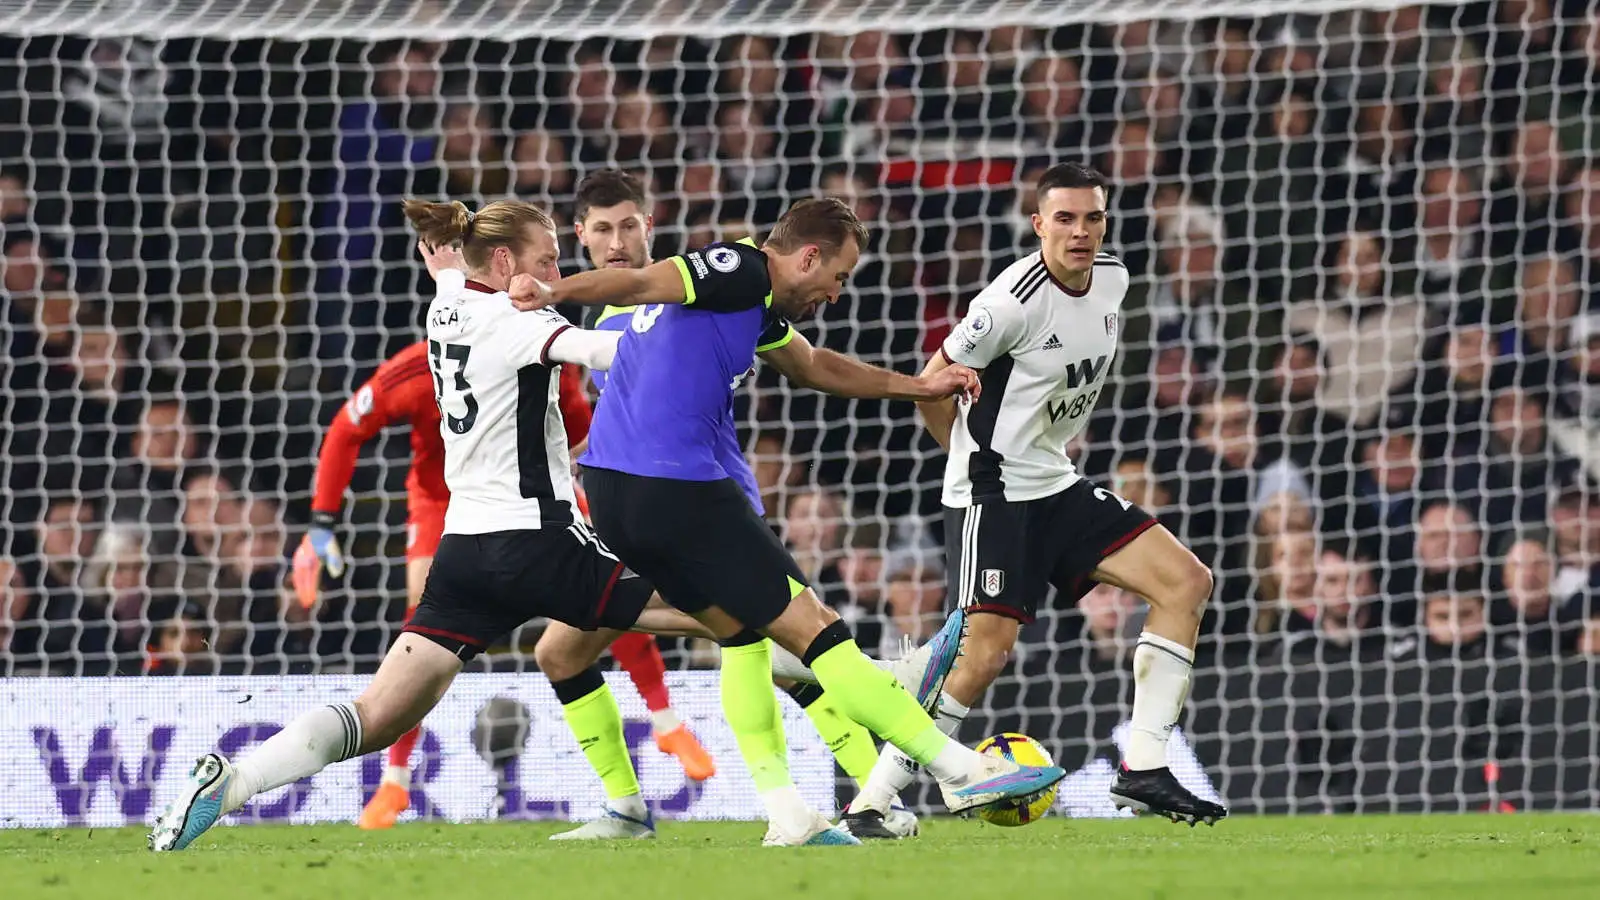 Harry Kane scores the winning goal for Spurs at Fulham